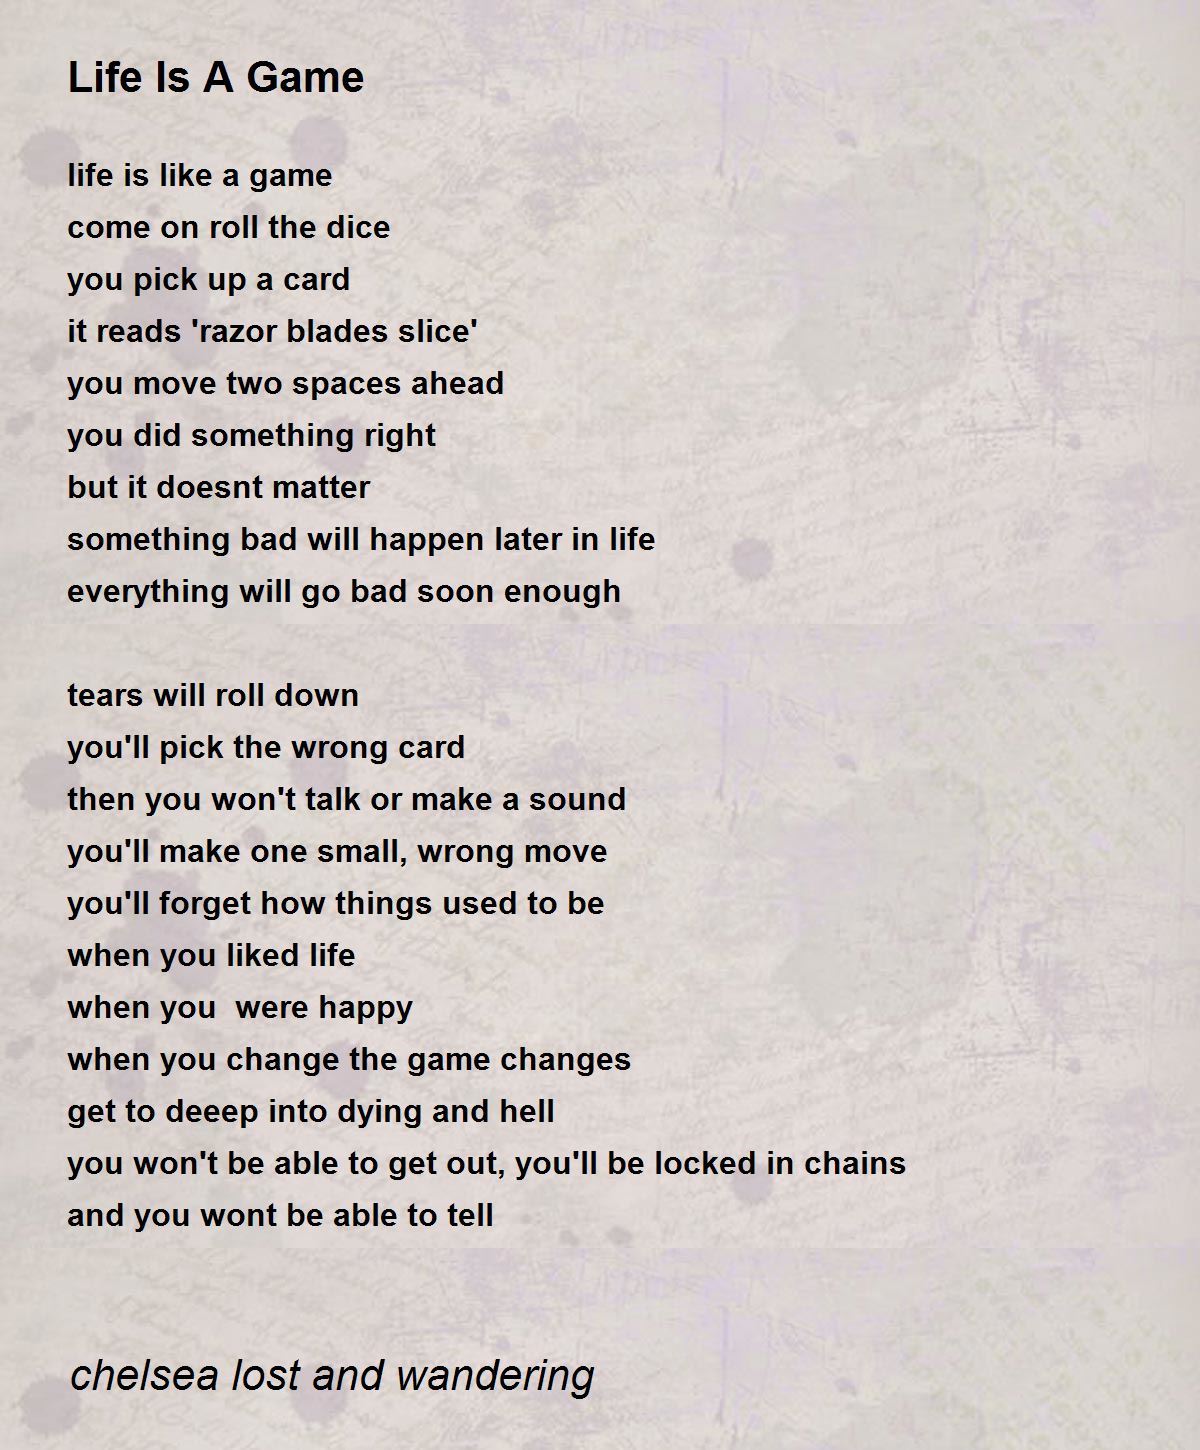 Life Is A Game Poem by chelsea lost and wandering - Poem 